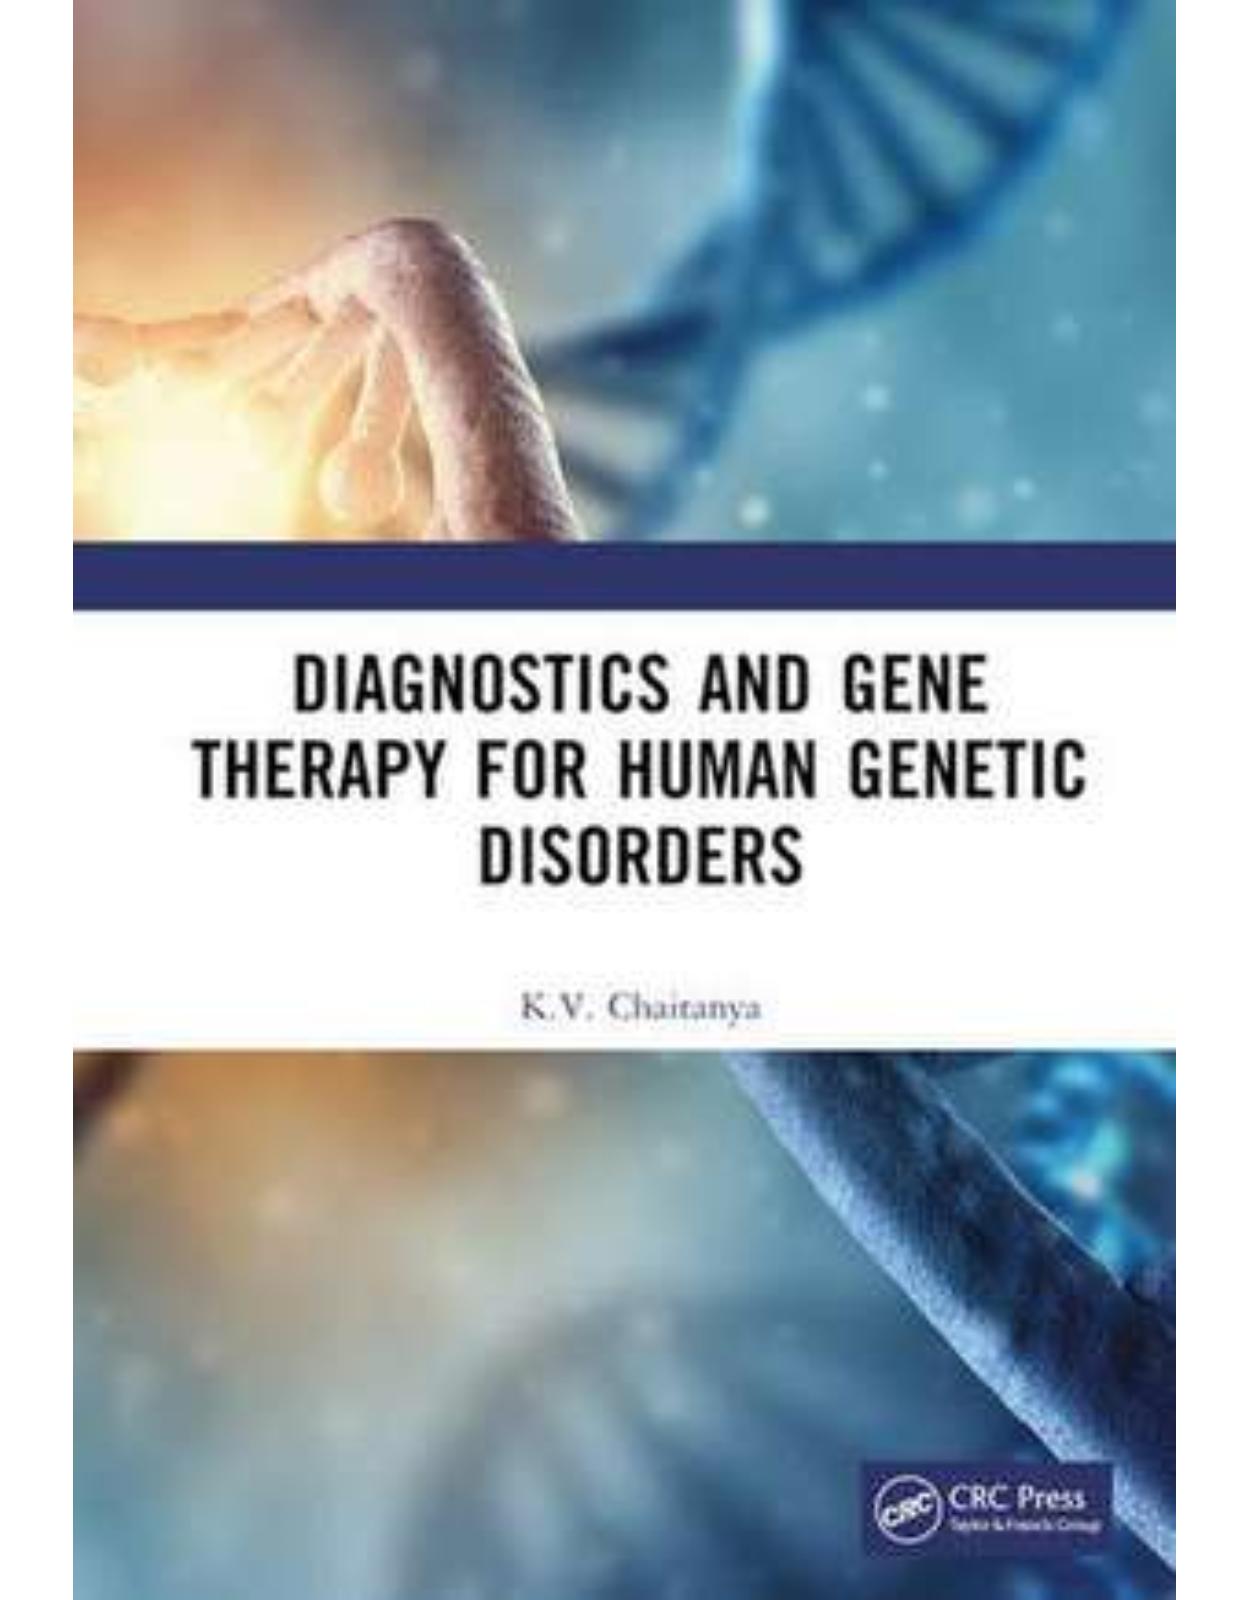 Chaitanya, K: Diagnostics and Gene Therapy for Human Genetic